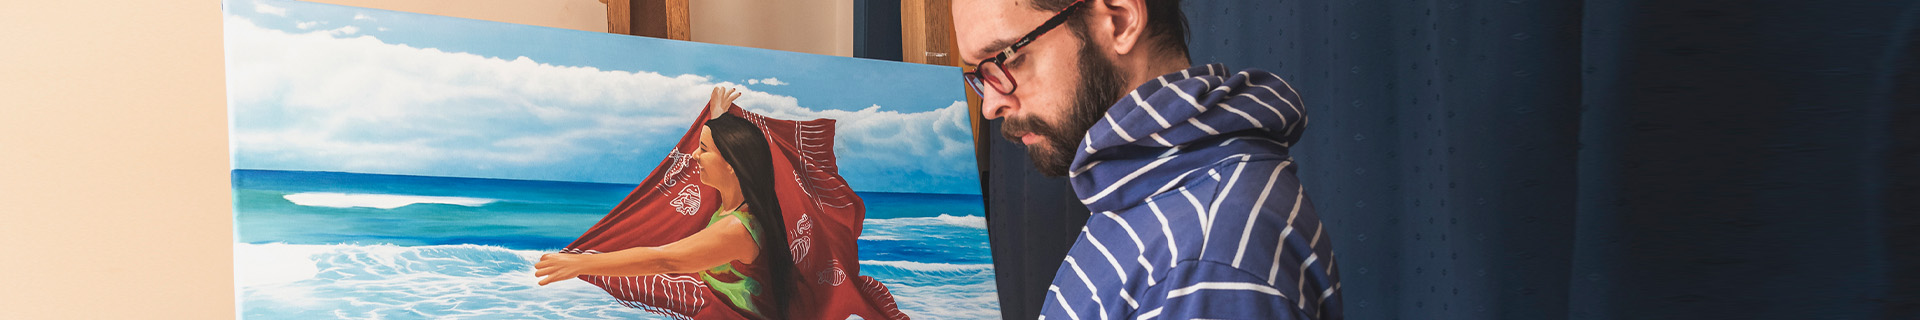 A painter works on a traditional oil paint of a hispanic mother on the beach.